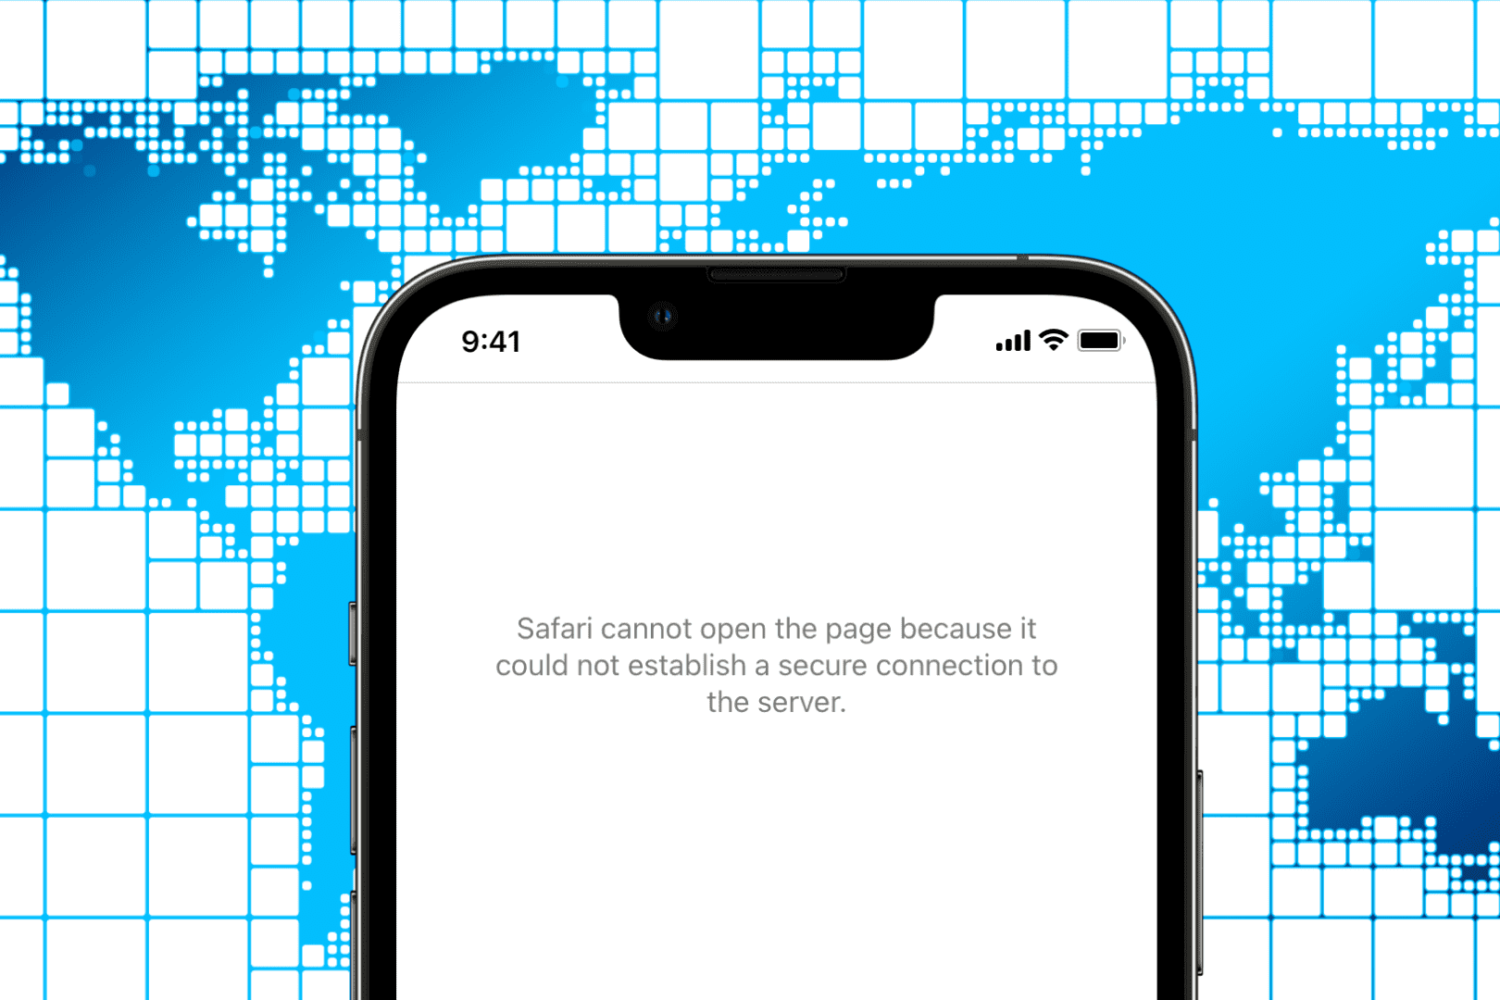 Map of world with iPhone on front showing a restricted website that failed to load